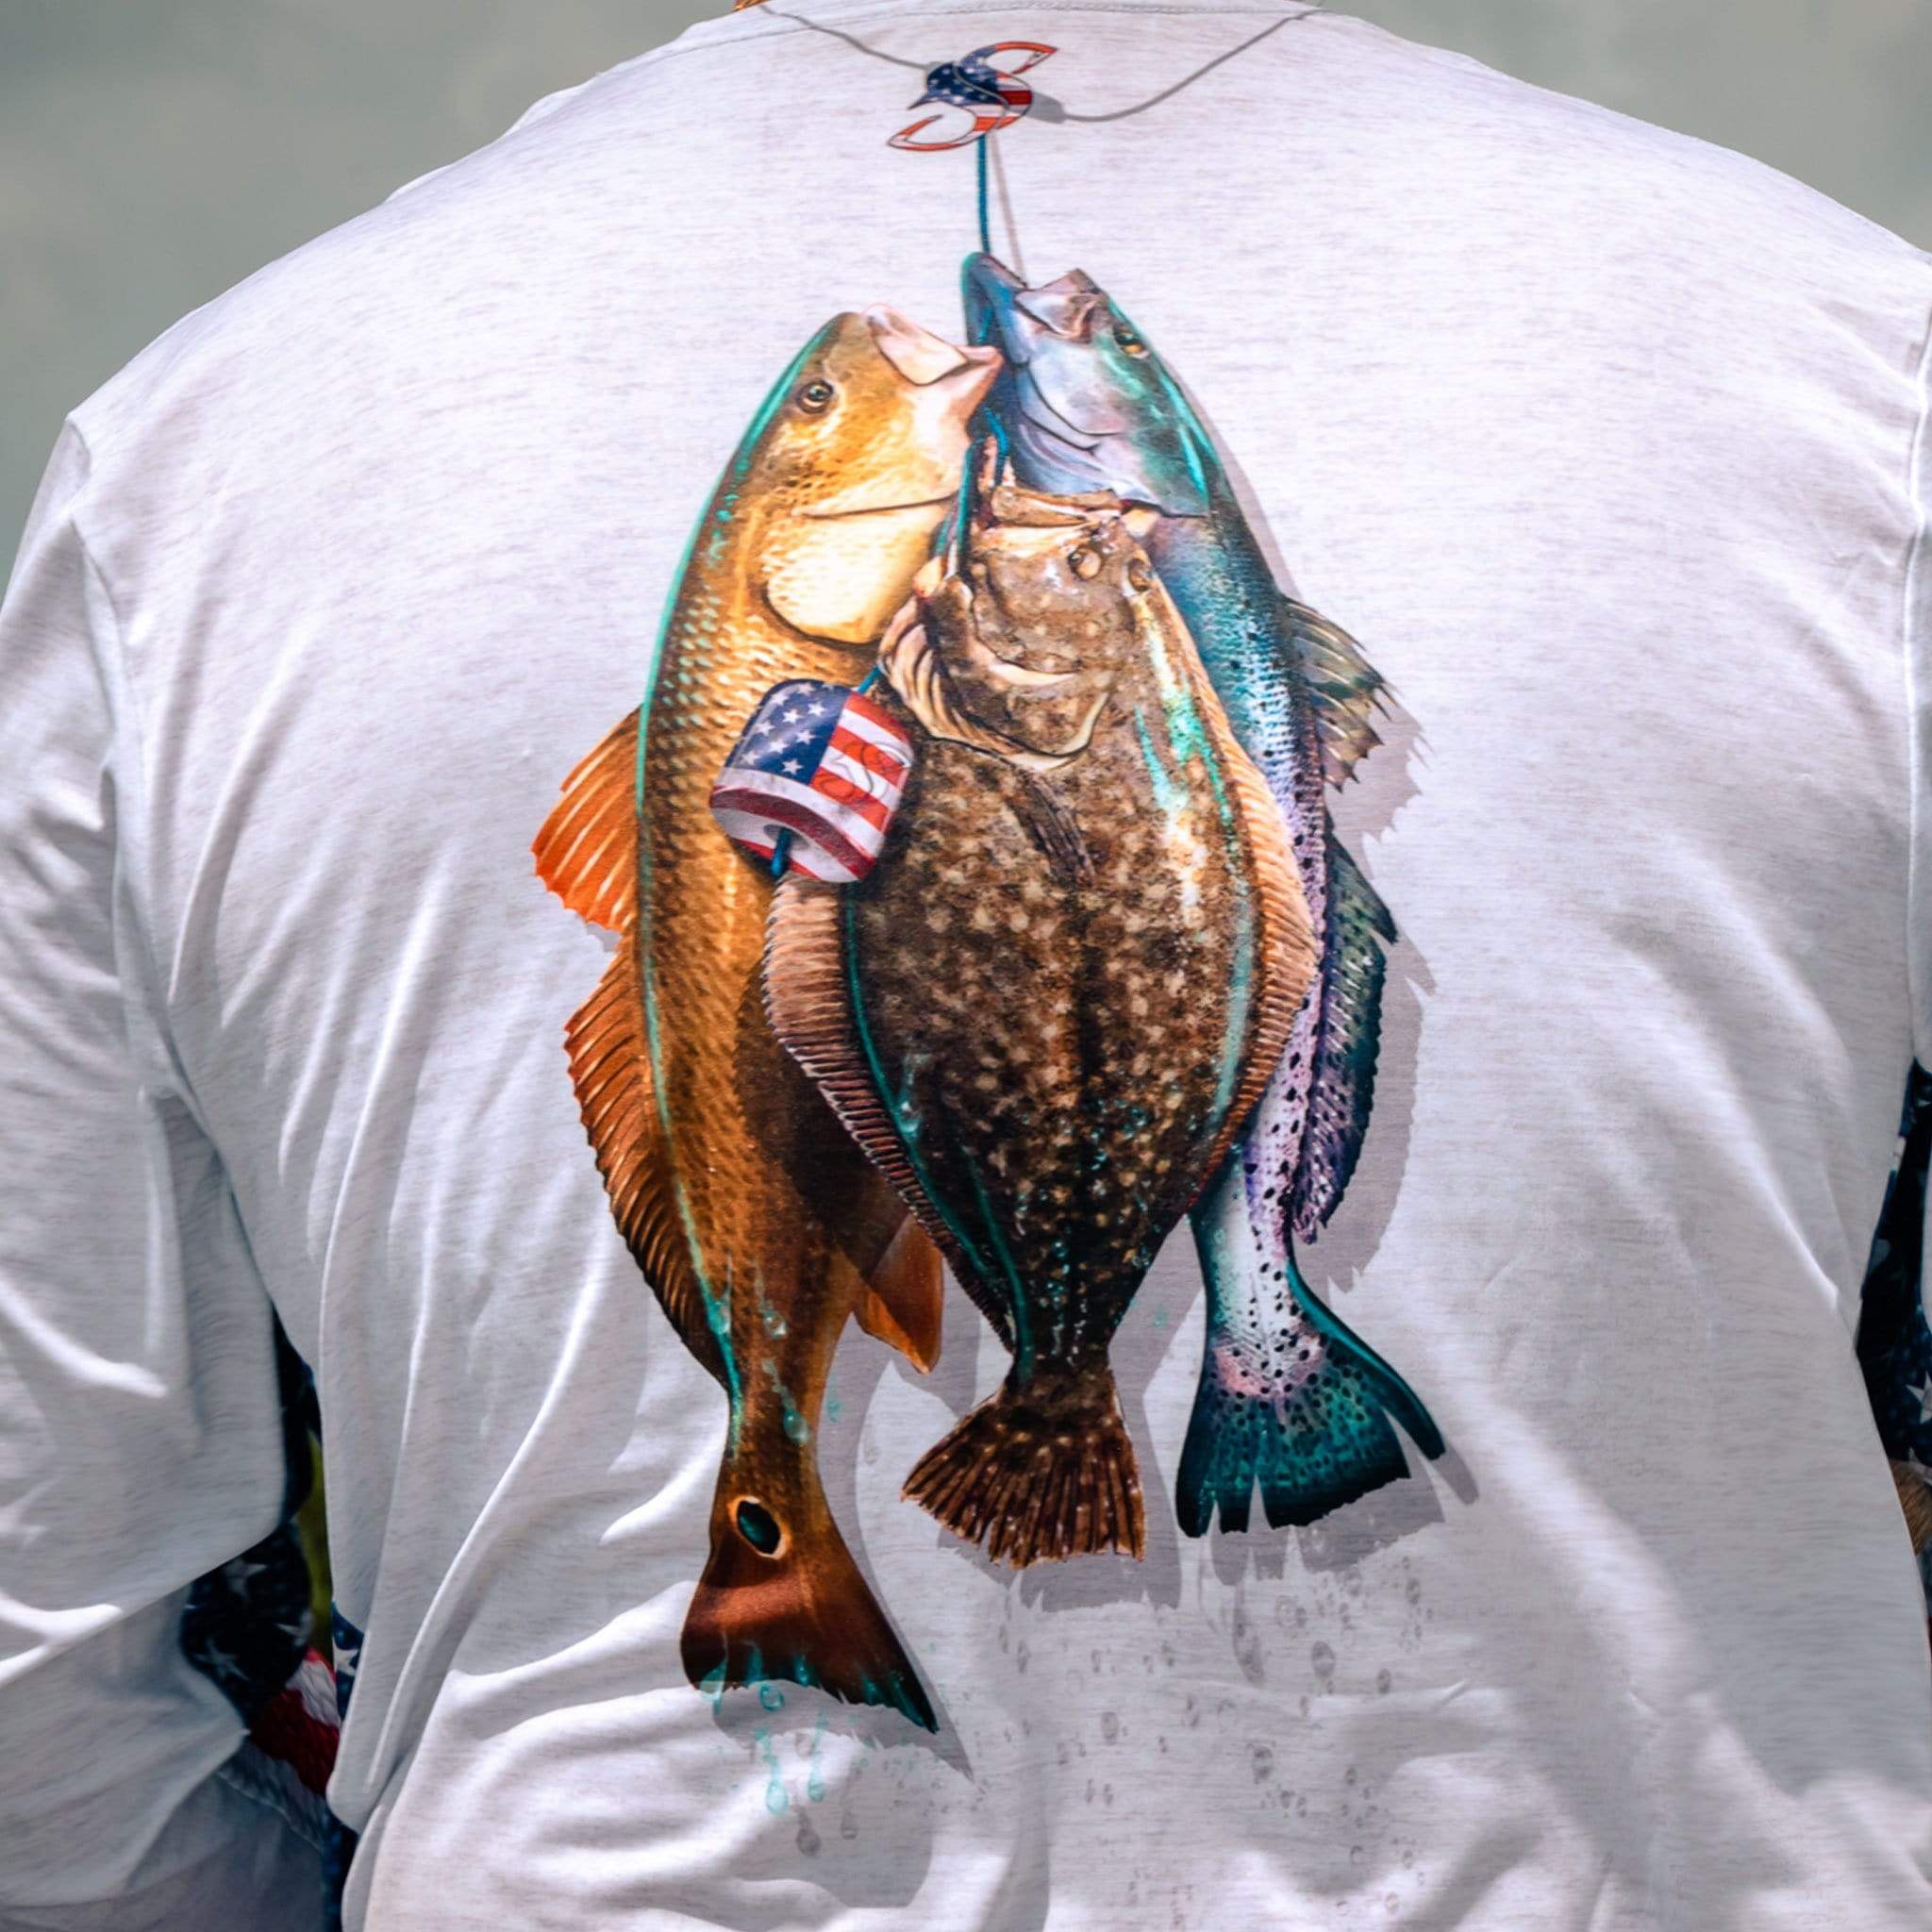 Performance Fishing Shirts & Apparel For Sun Protection